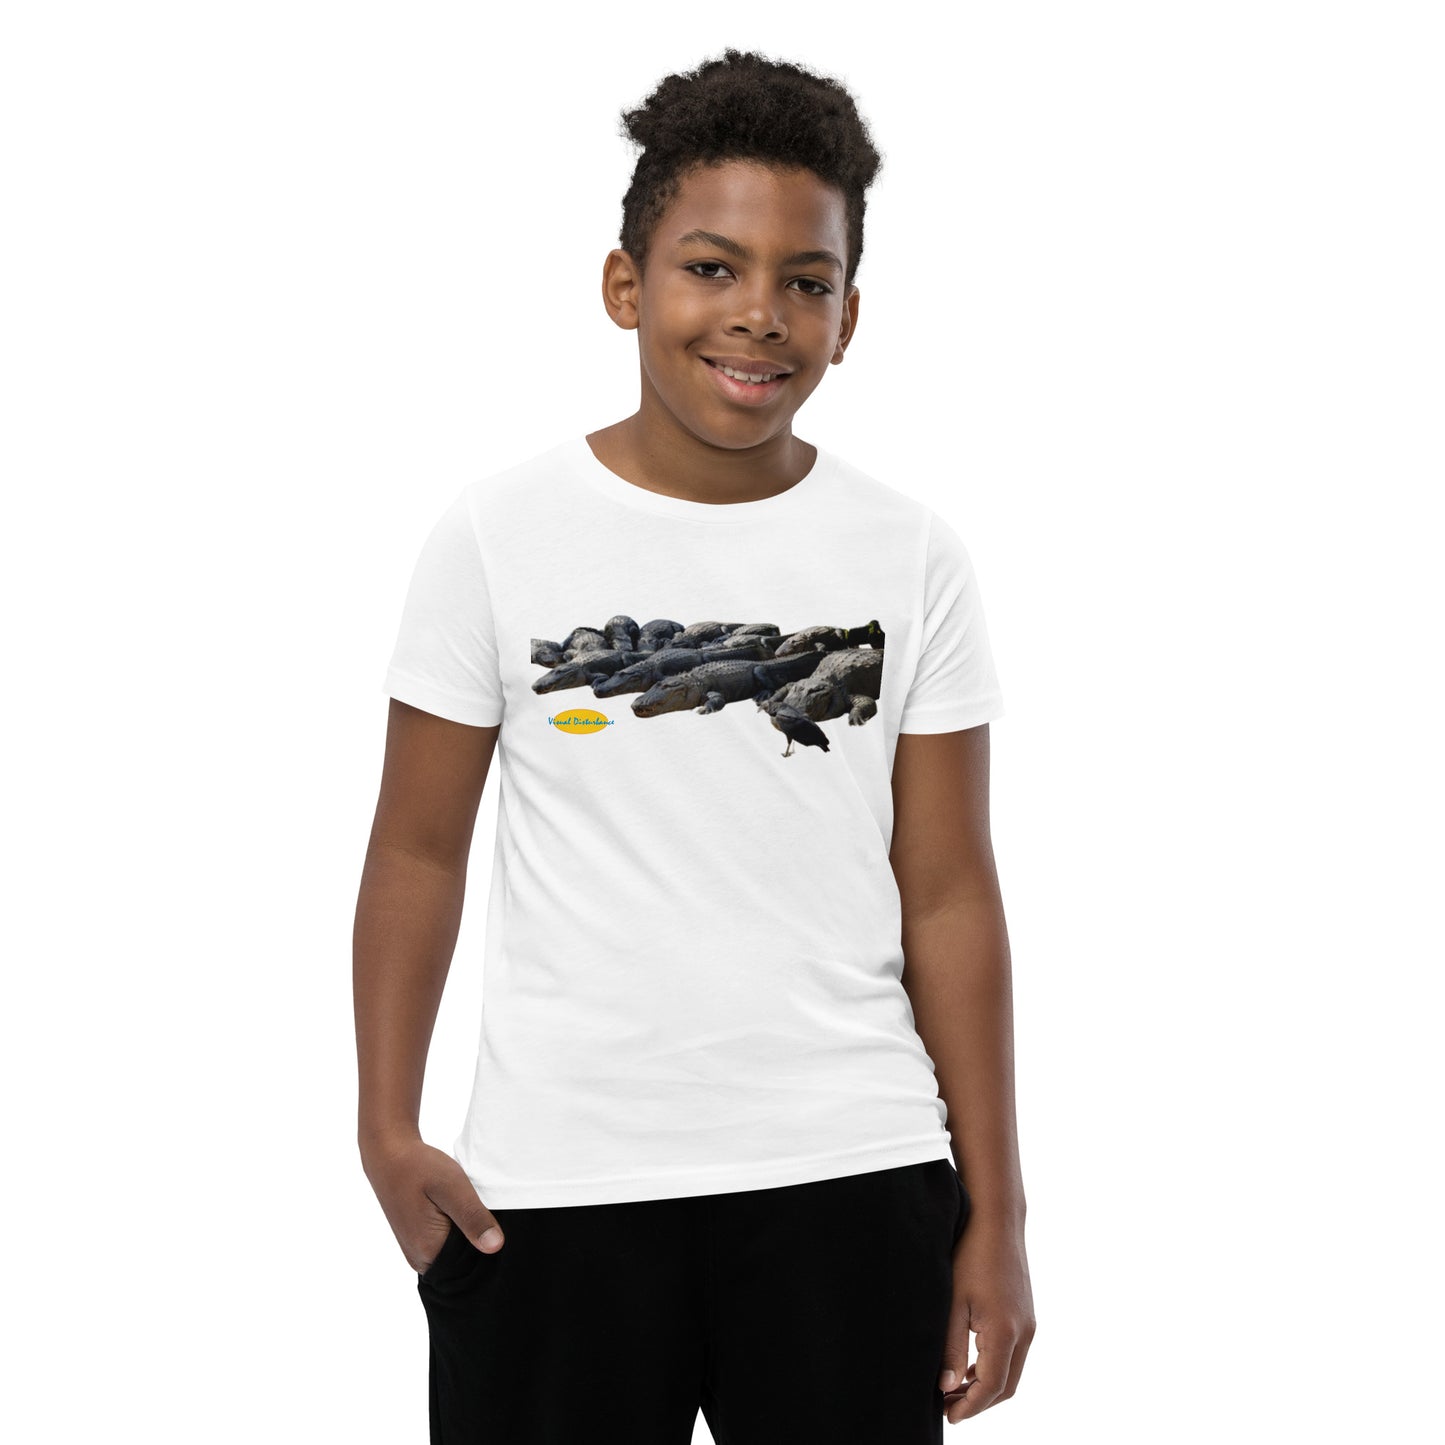 A Vulture and Alligators Youth Short Sleeve T-Shirt